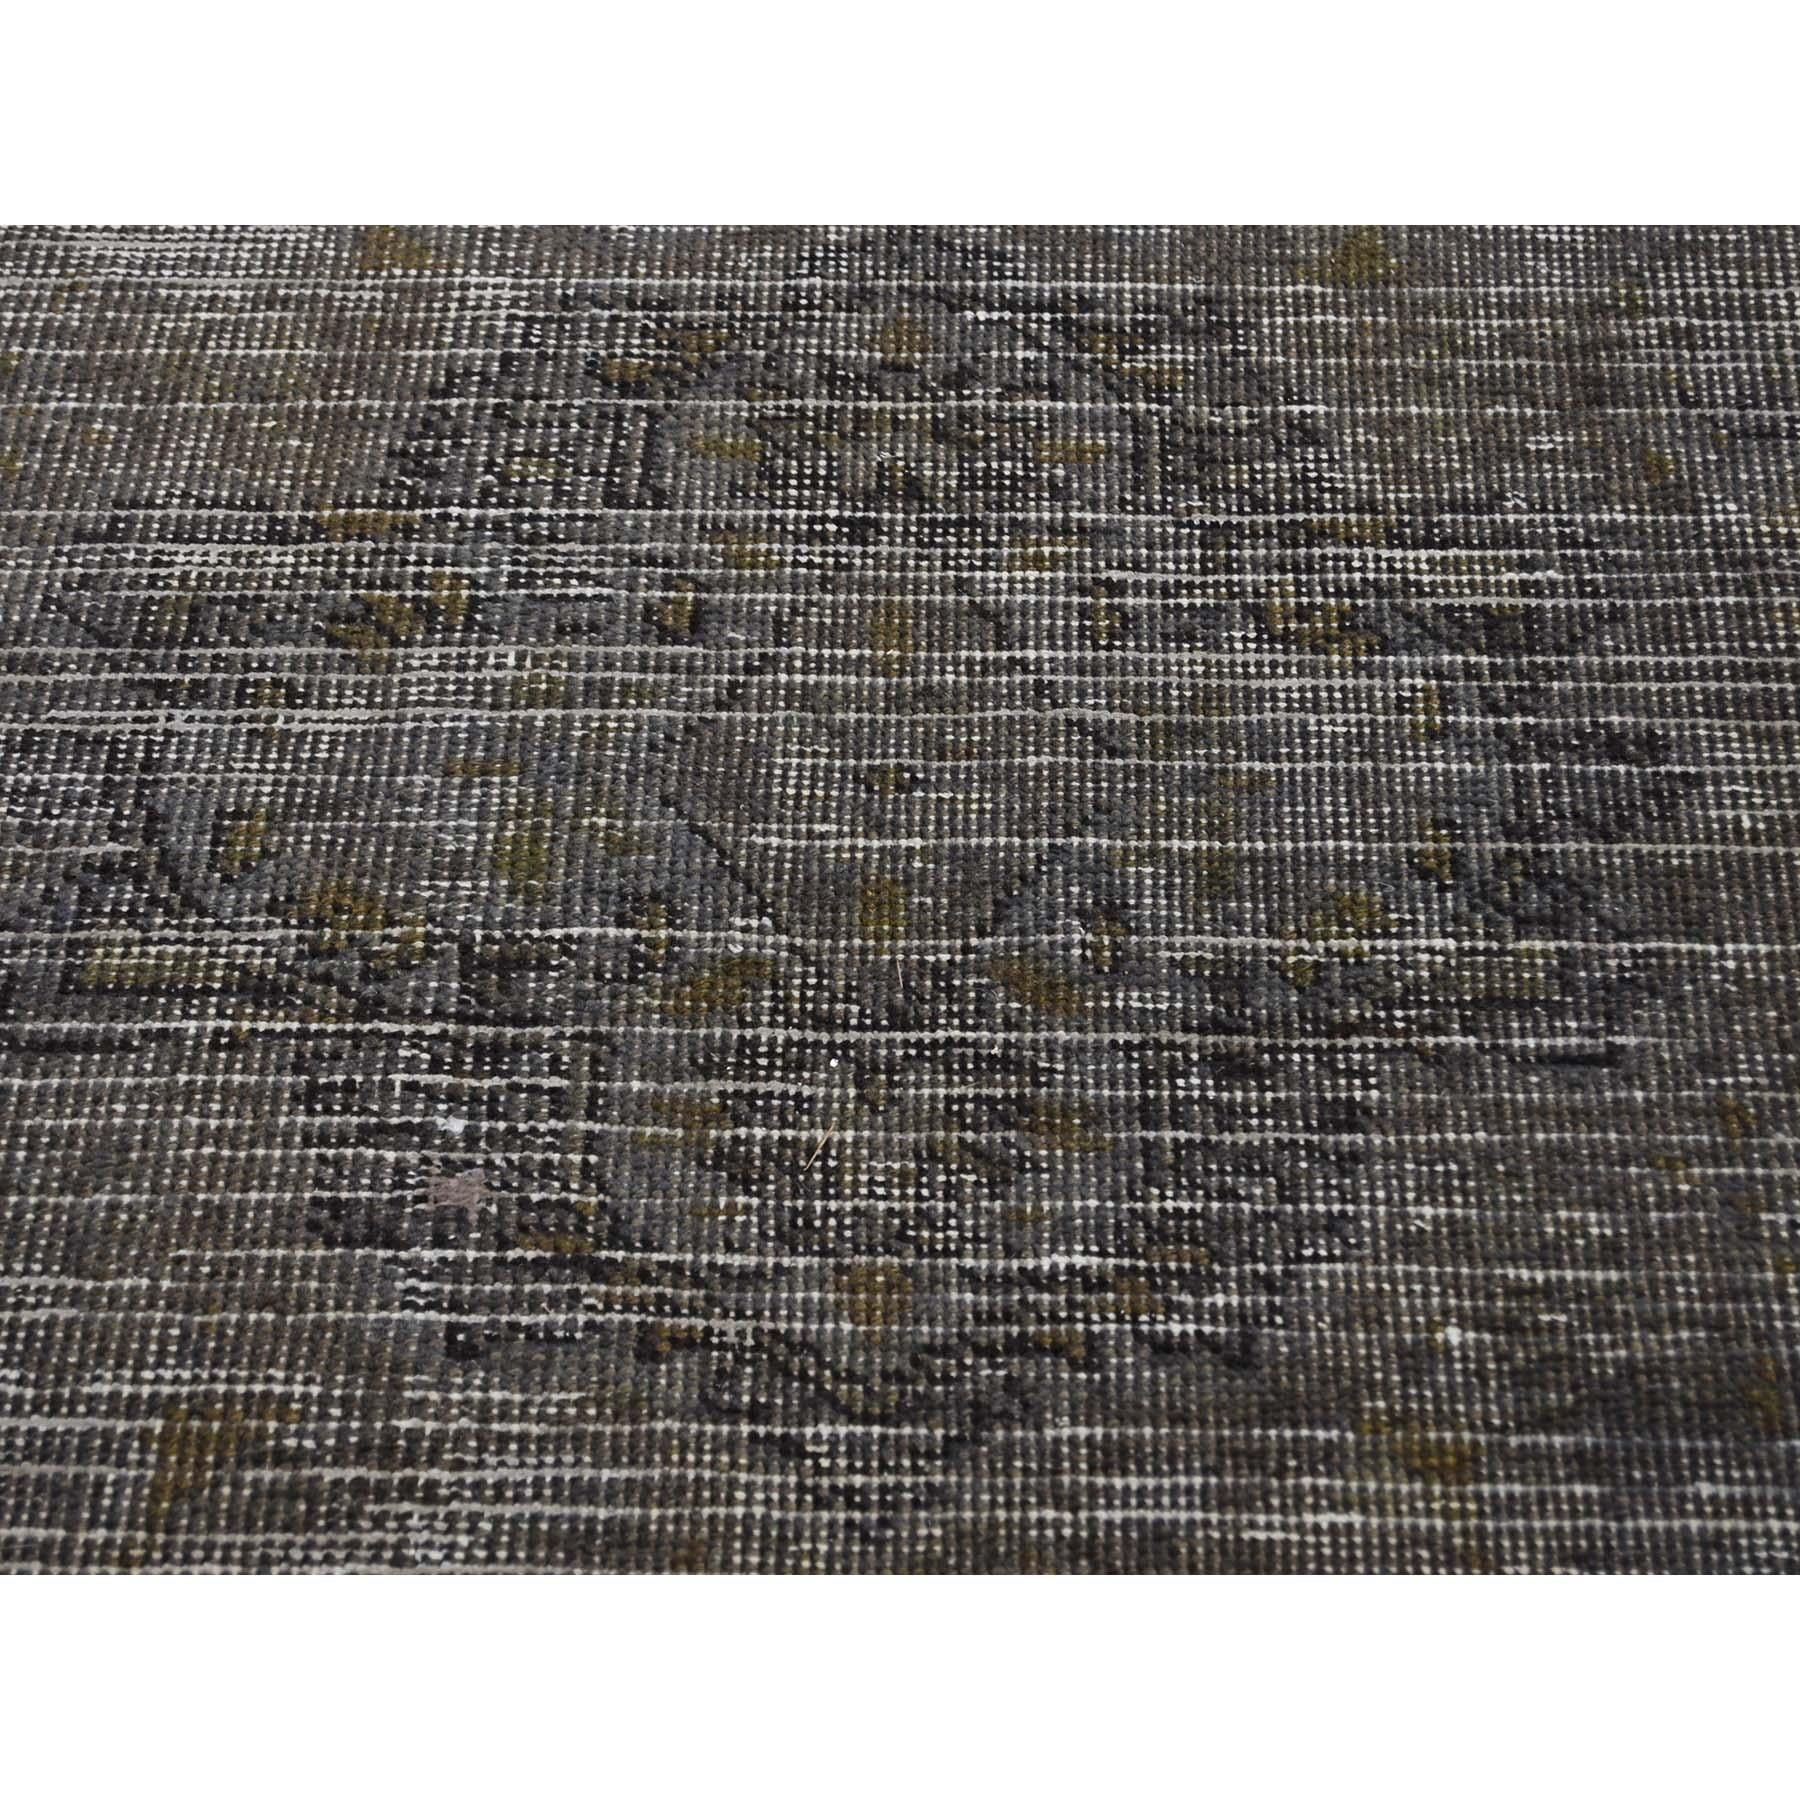 Grey Overdyed Persian Tabriz Worn Pile Hand Knotted Oriental Rug 2